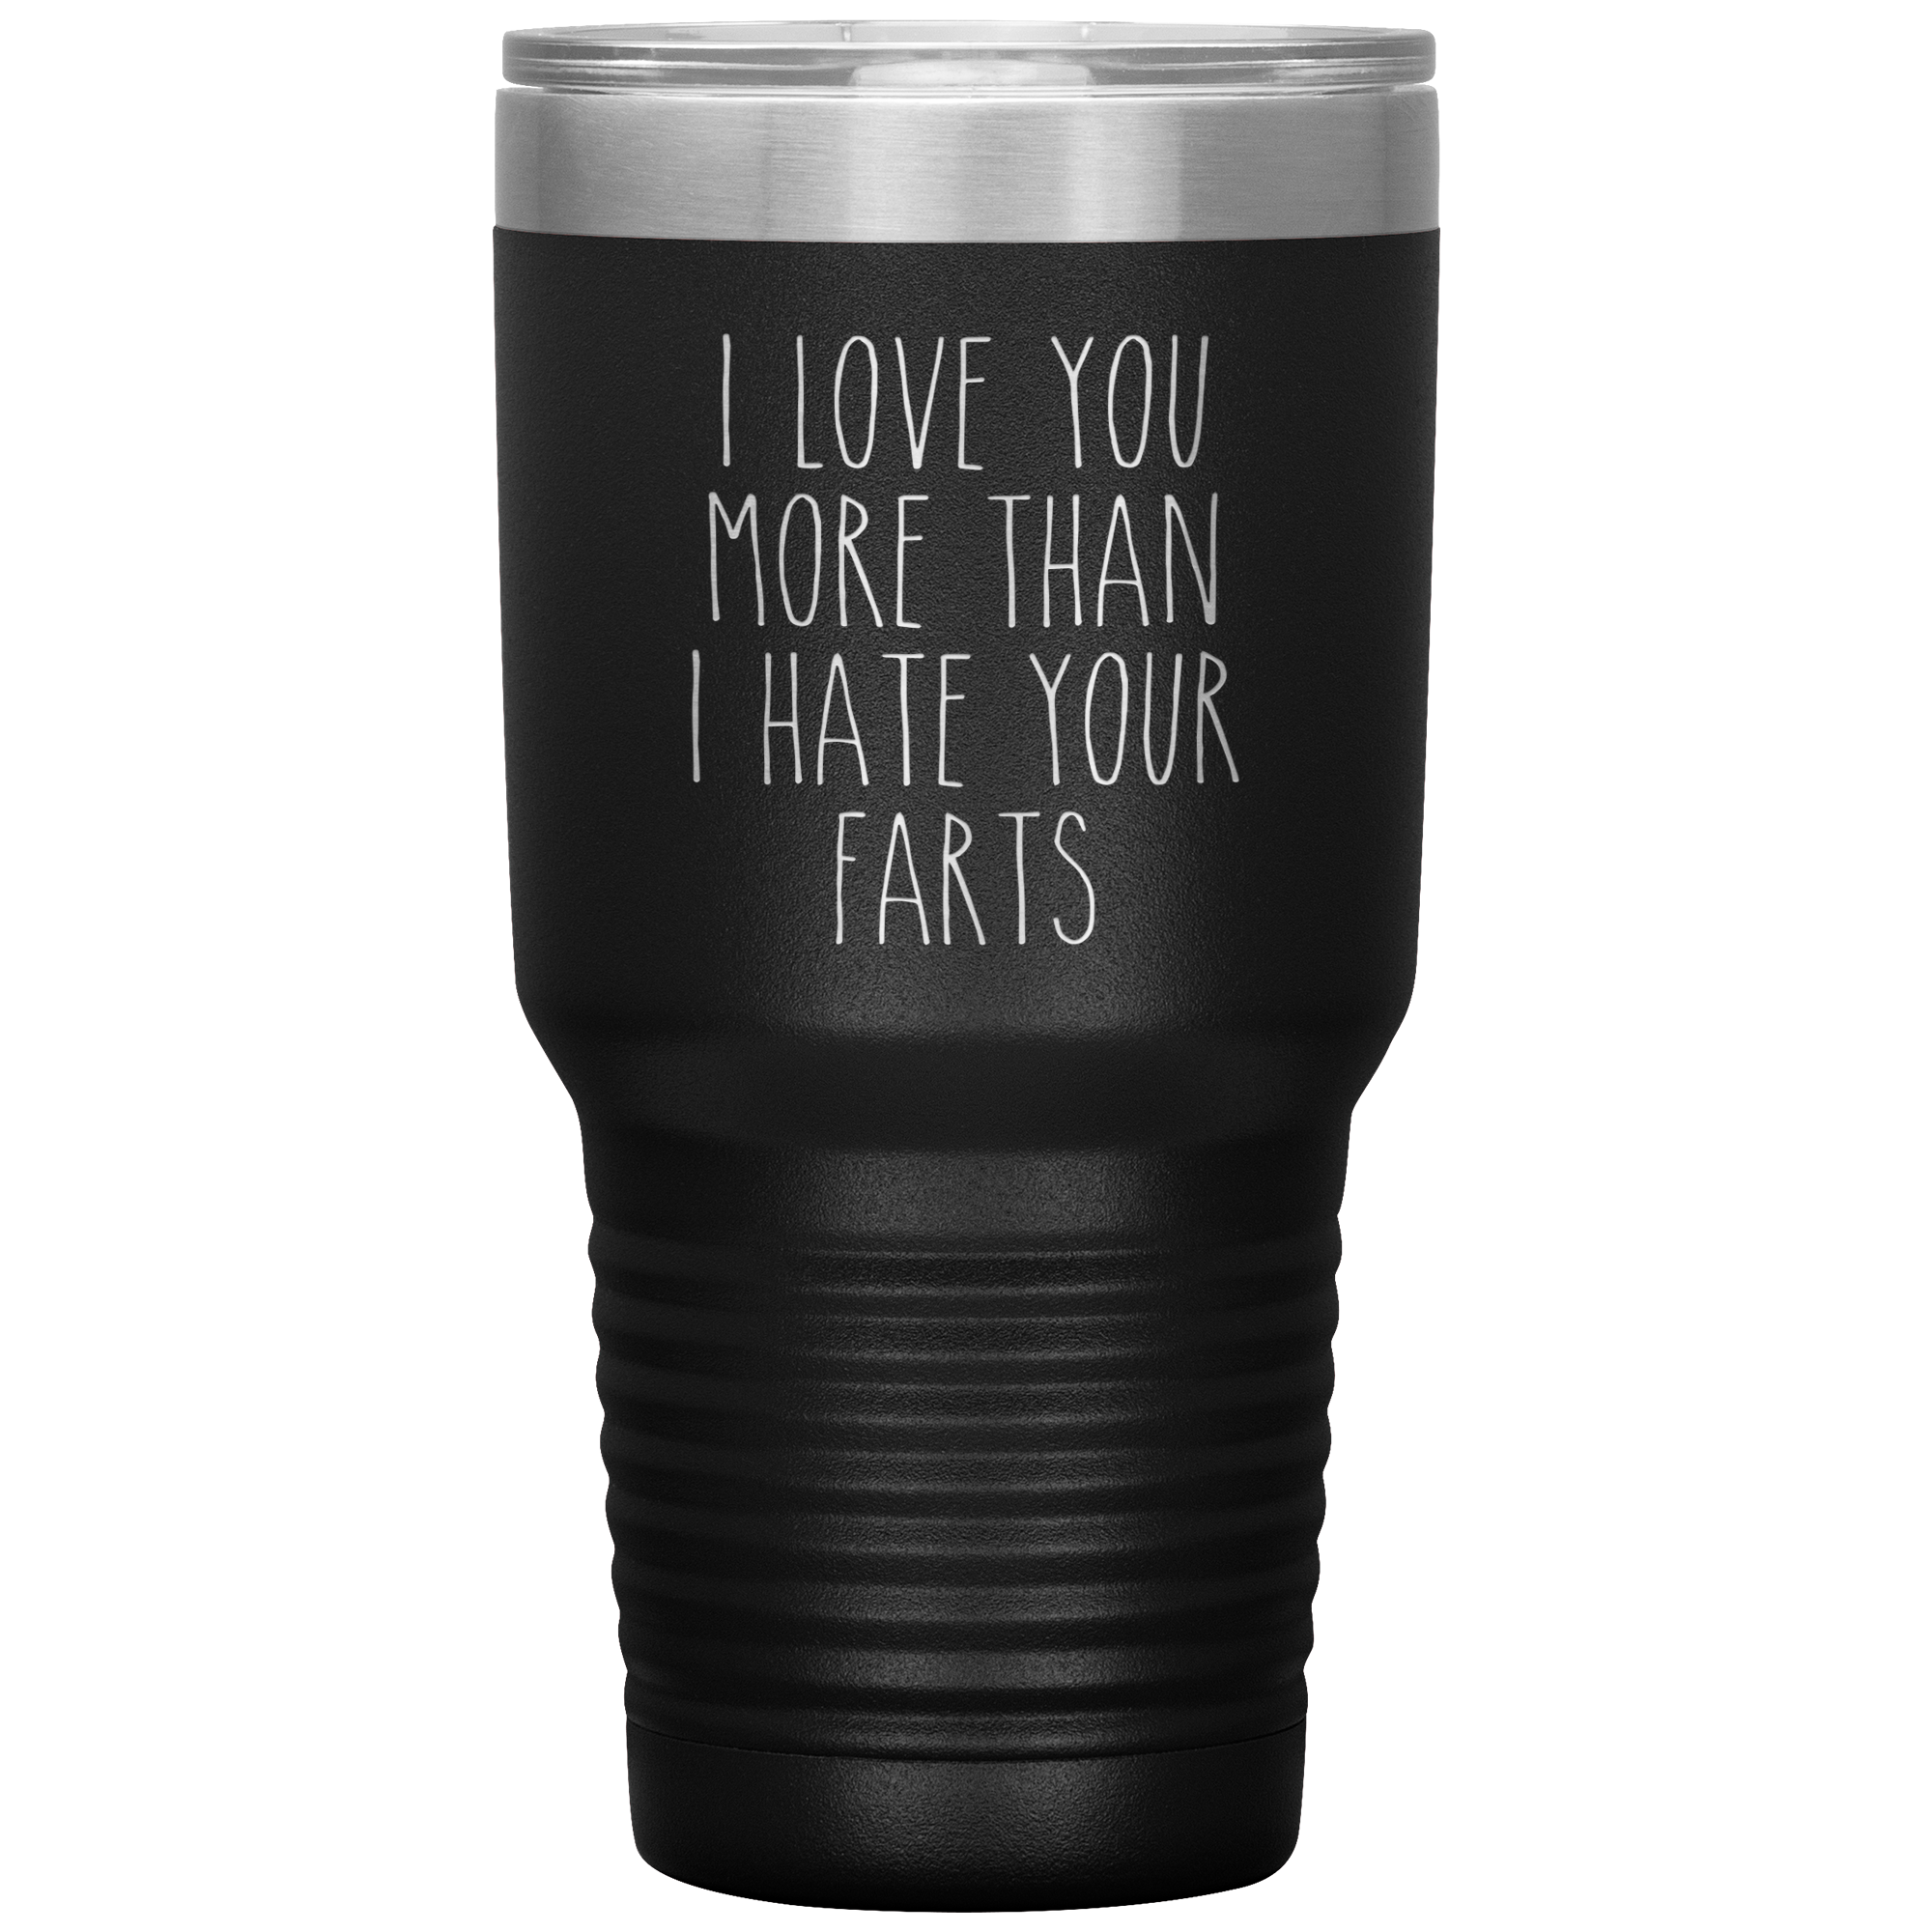 I Love You More Than I Hate Your Farts Tumbler Funny Anniversary Gift Cute But Rude